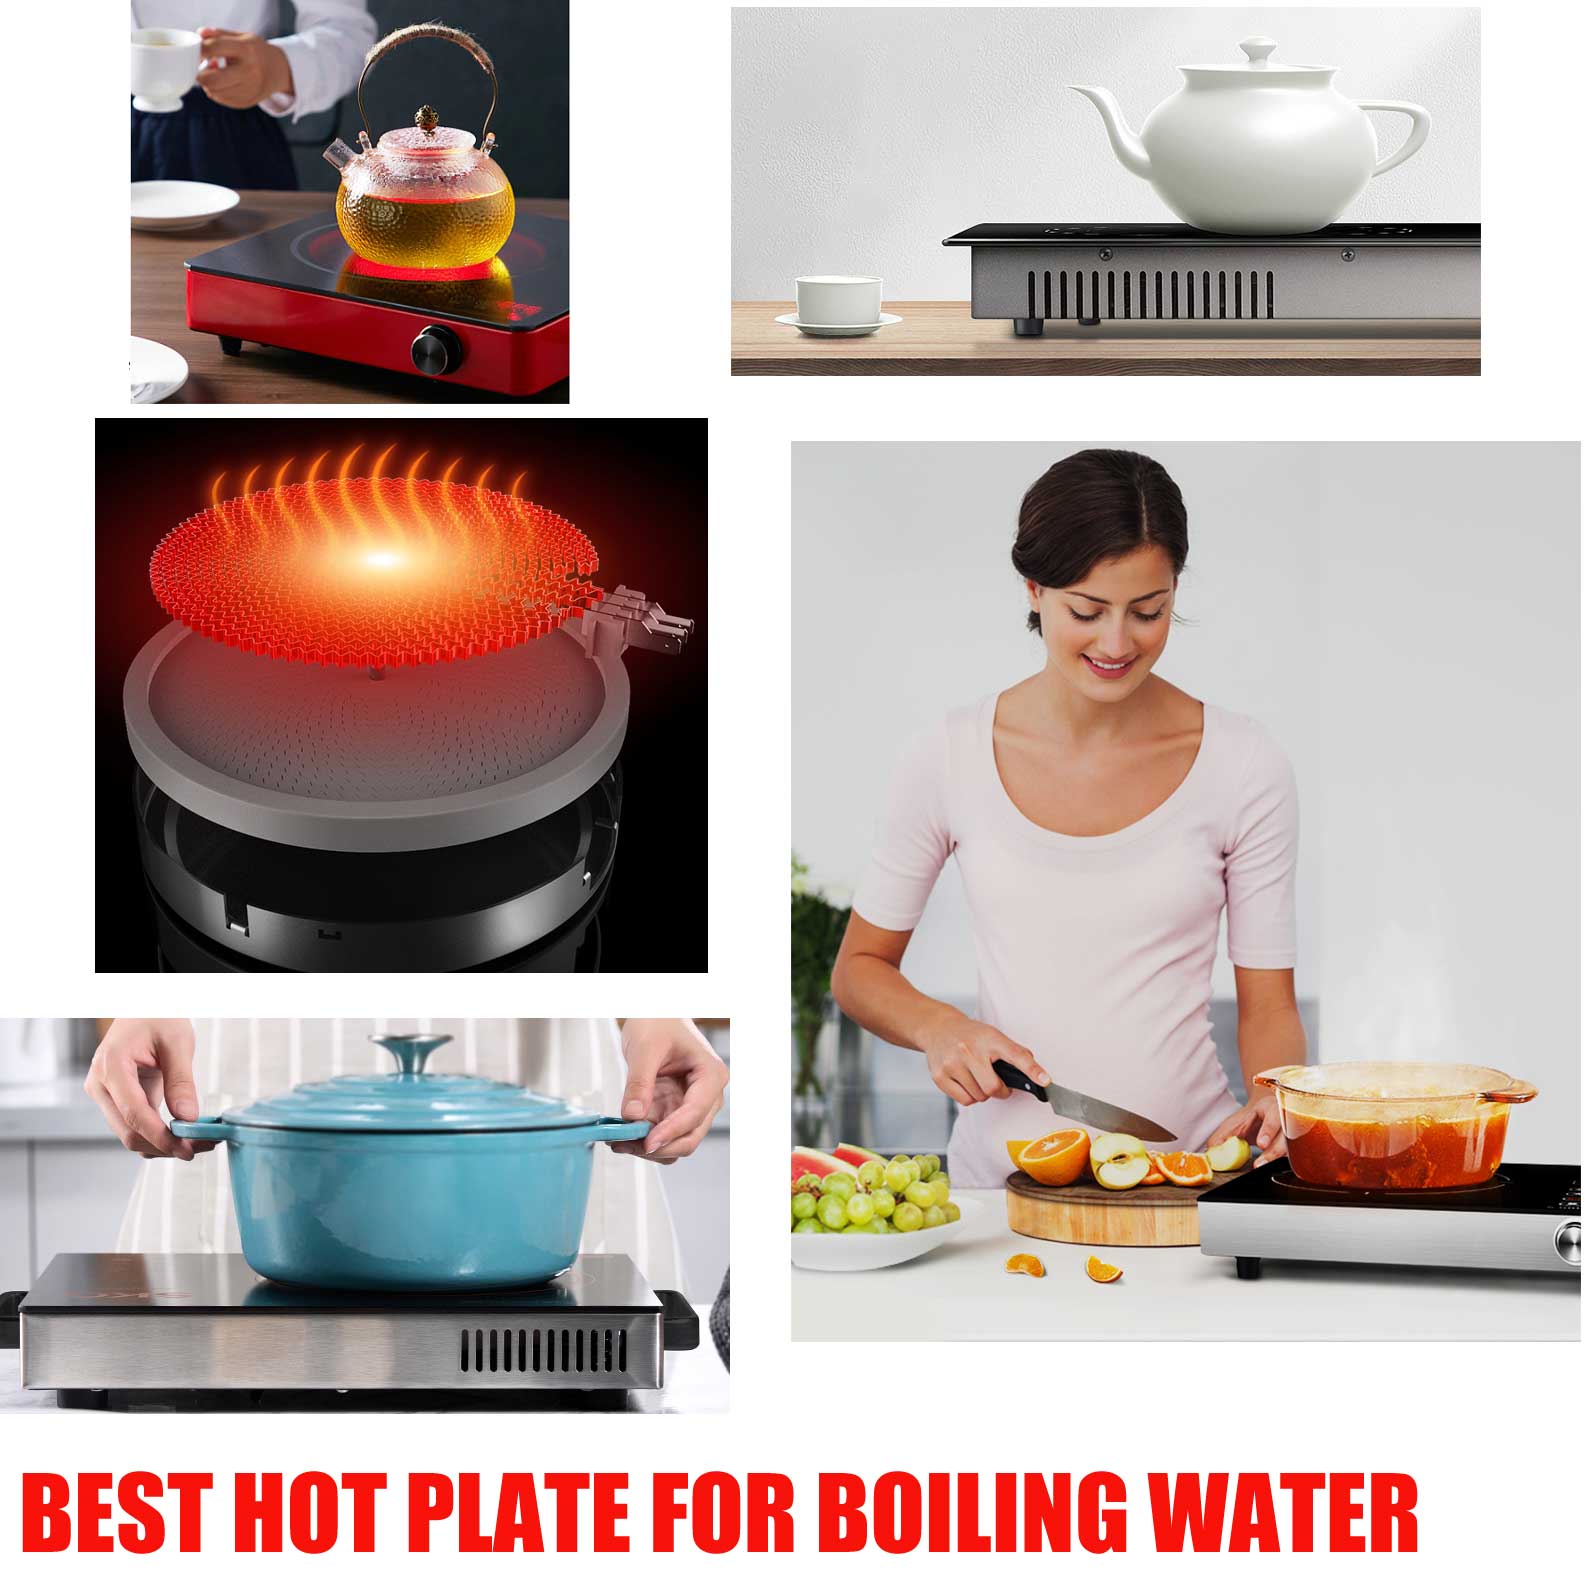 Best hot plate for boiling water